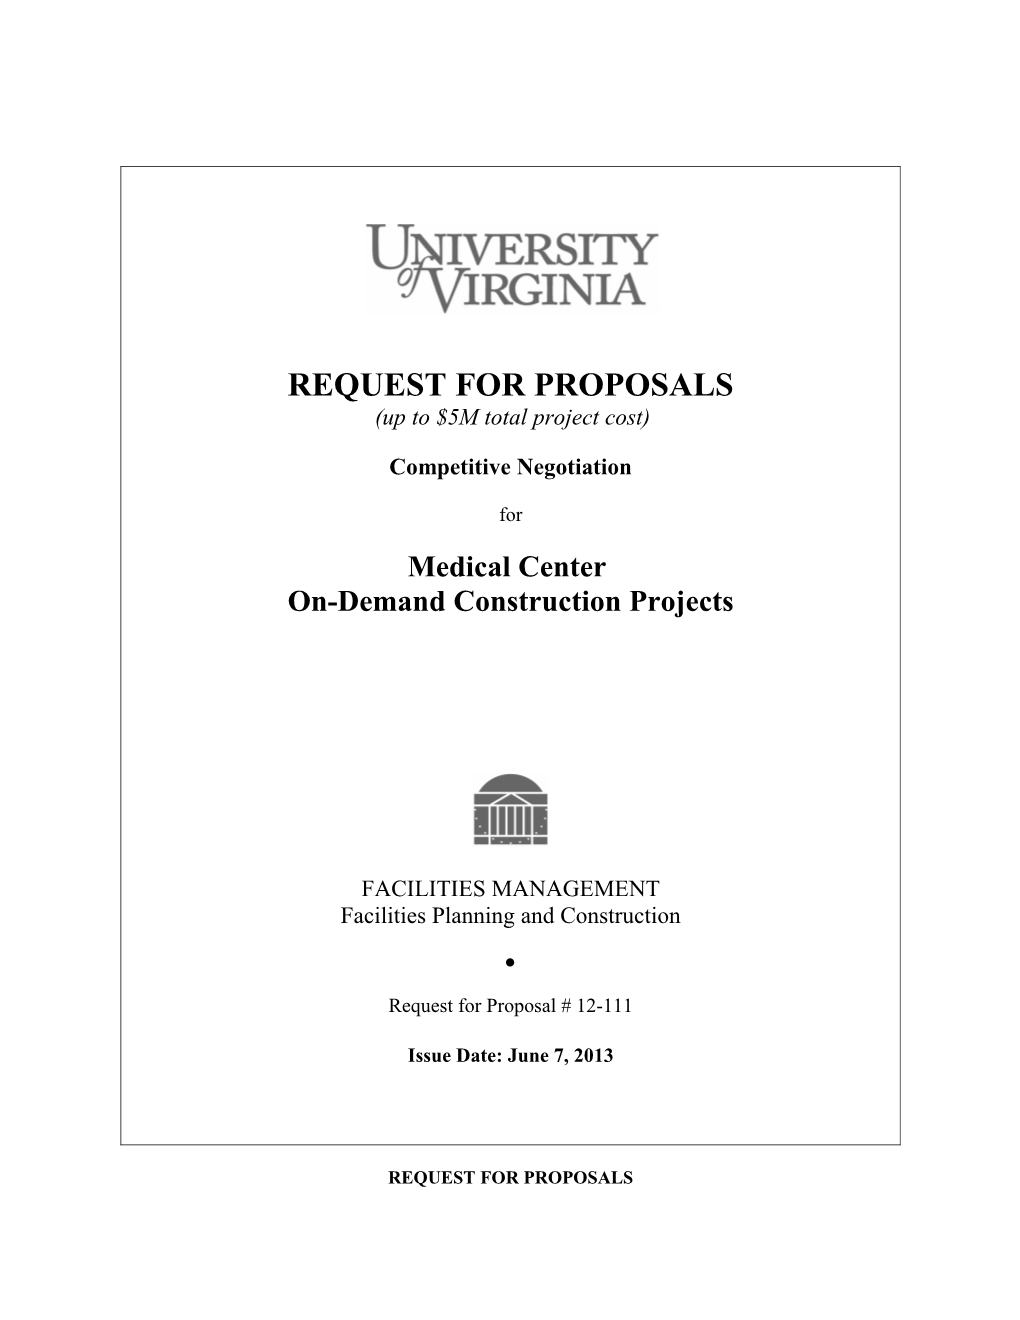 Medical Center On-Demand Construction Projects RFP # 12-111